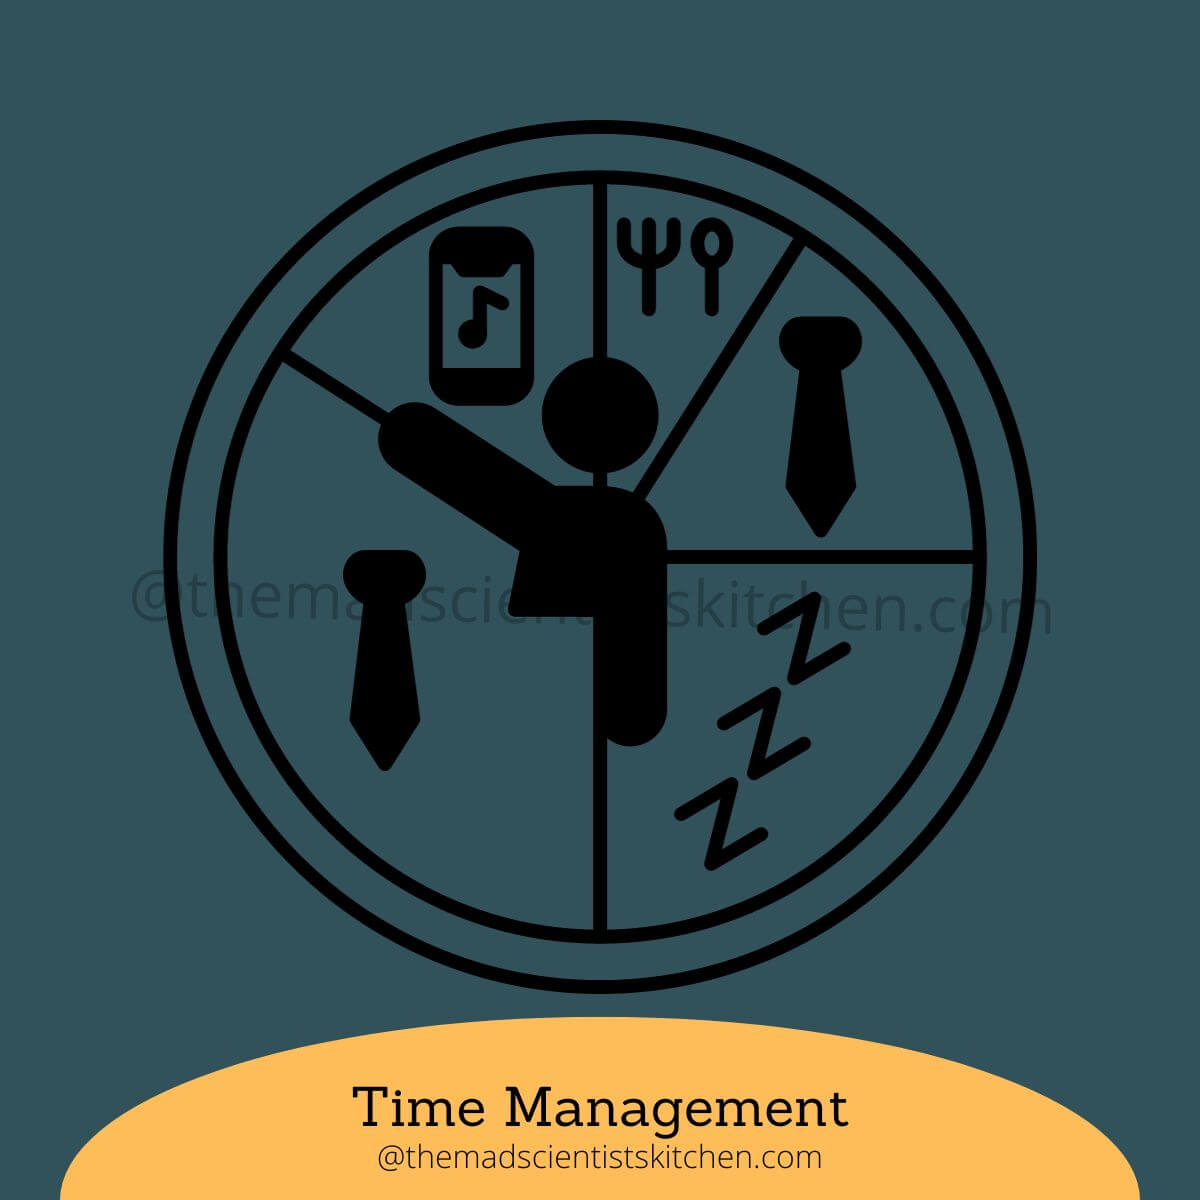 Time management is important for young adults living independently